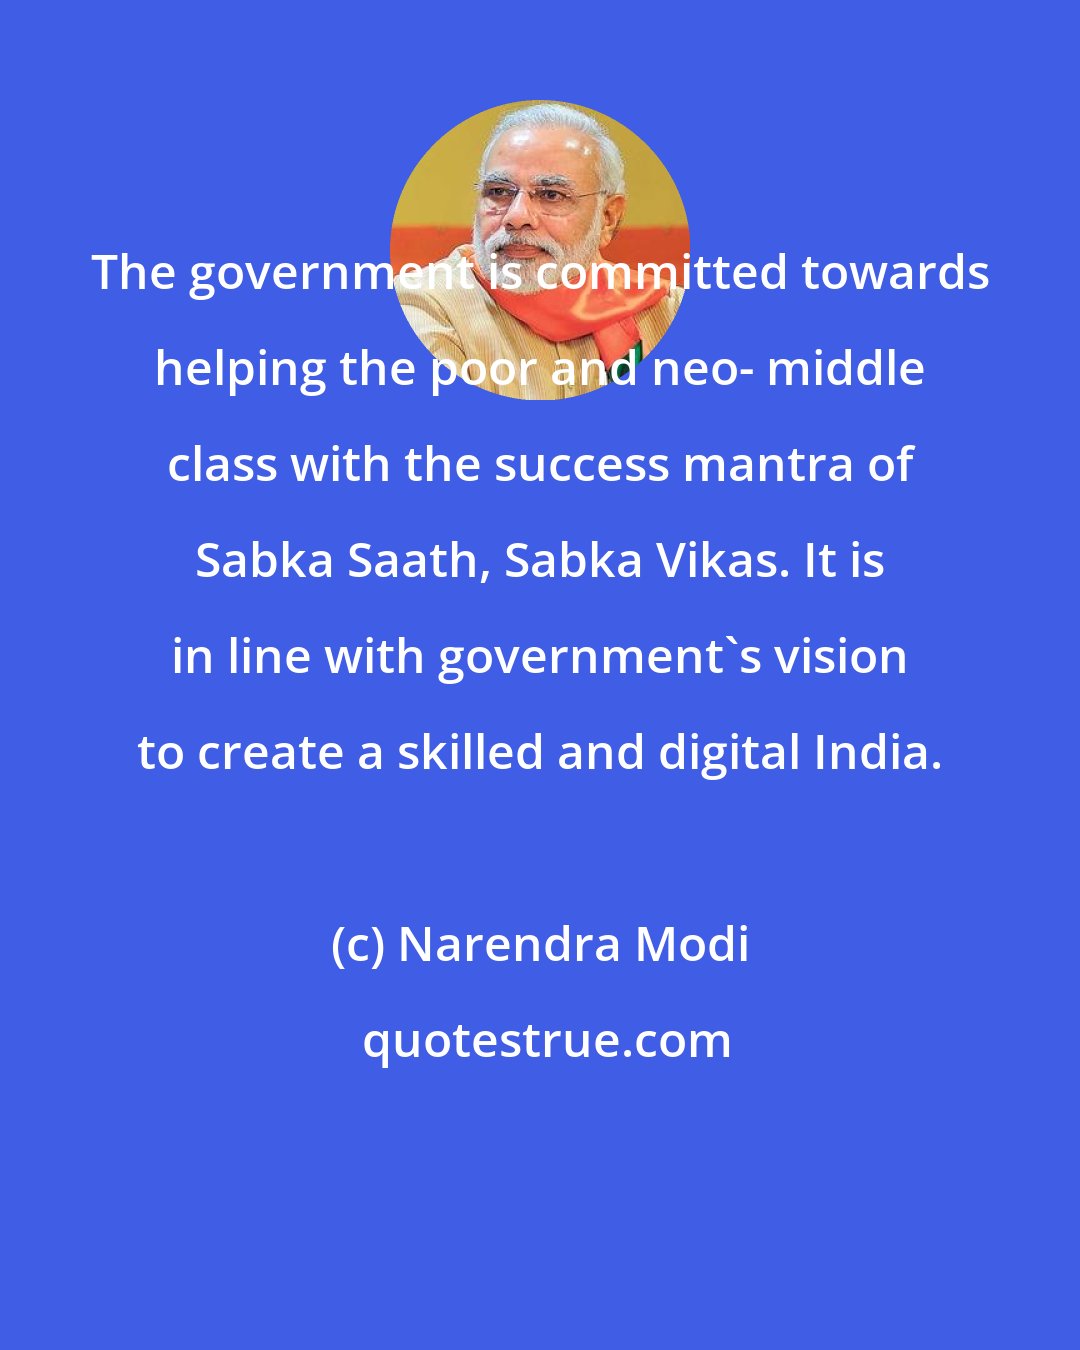 Narendra Modi: The government is committed towards helping the poor and neo- middle class with the success mantra of Sabka Saath, Sabka Vikas. It is in line with government's vision to create a skilled and digital India.